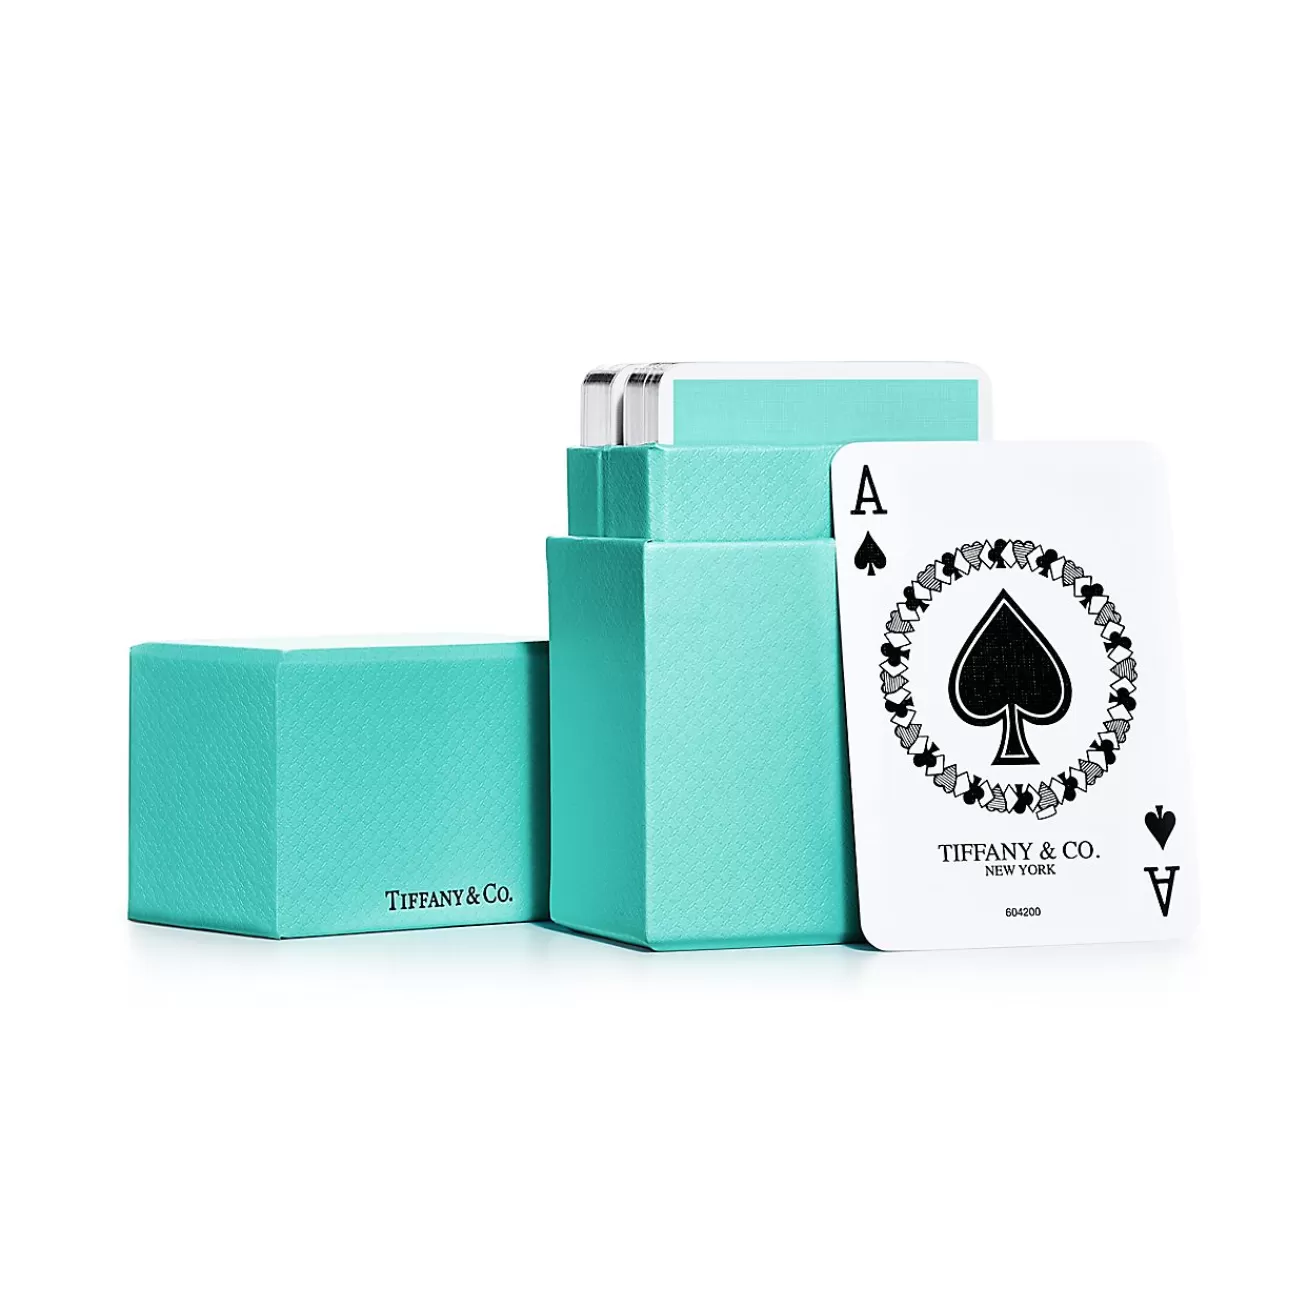 Tiffany & Co. Tiffany Travel playing cards in a Tiffany Blue® box. | ^ The Home | Housewarming Gifts